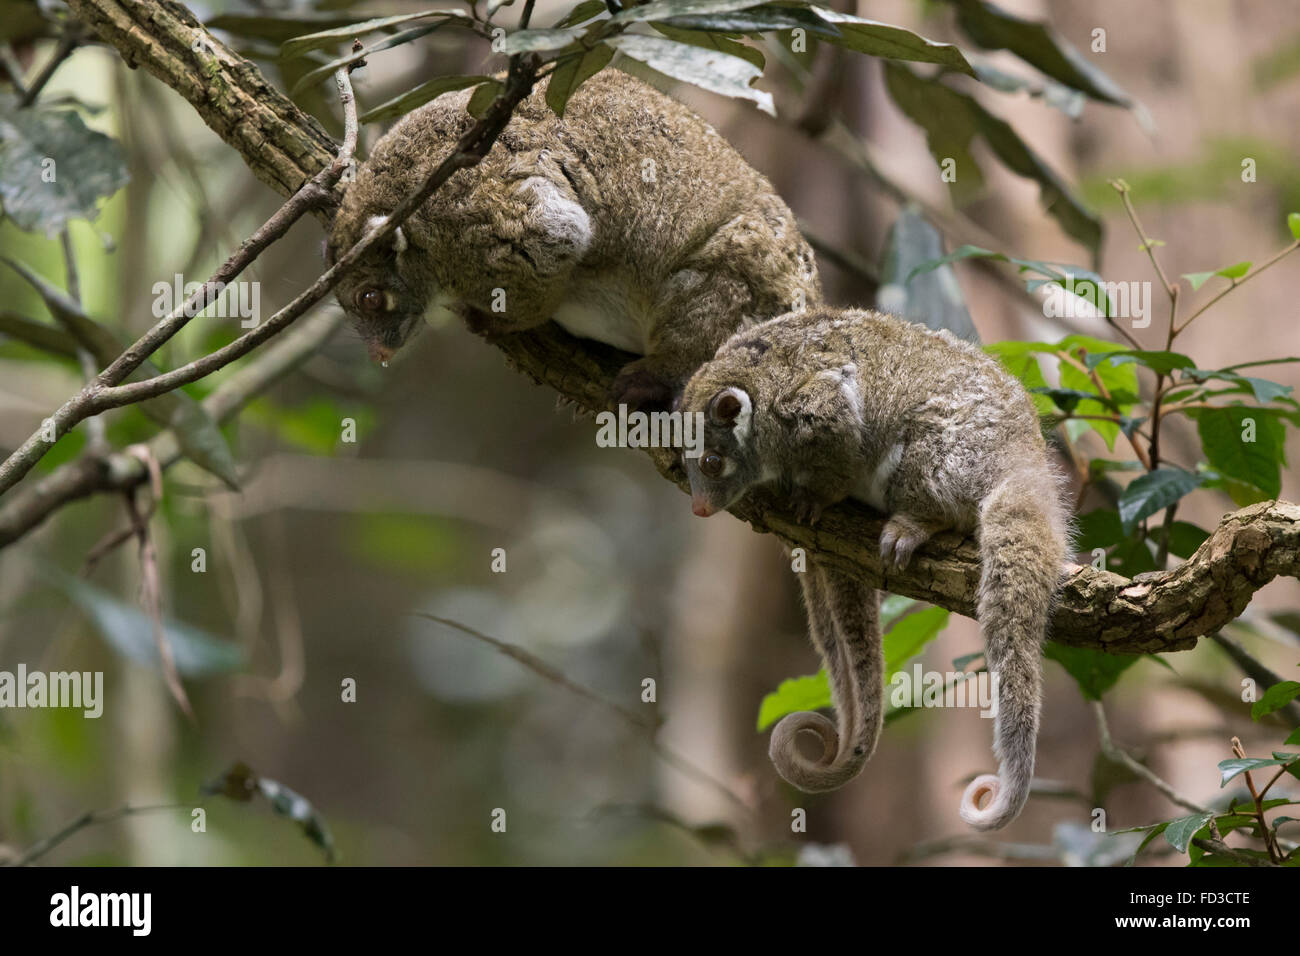 mother & young Green Ring-tailed Possums (Pseudochirops archeri) Stock Photo